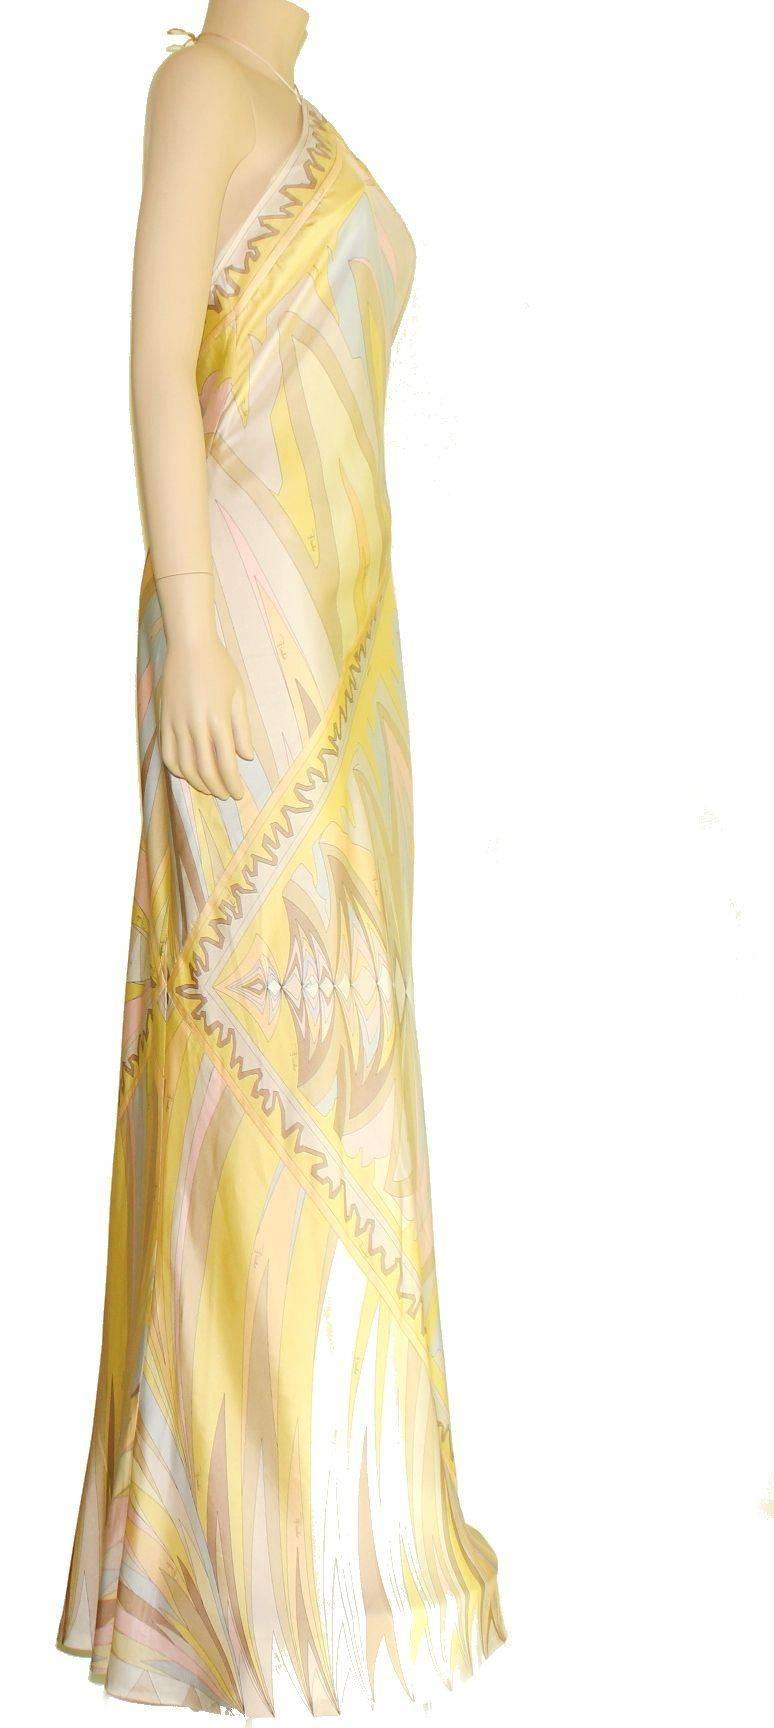 BEAUTIFUL 

EMILIO PUCCI PASTEL SIGNATURE PRINT GOWN

A timeless EMILIO PUCCI gown that will never go out of style!

AS WORN BY SUPERSTAR JENNIFER LOPEZ 